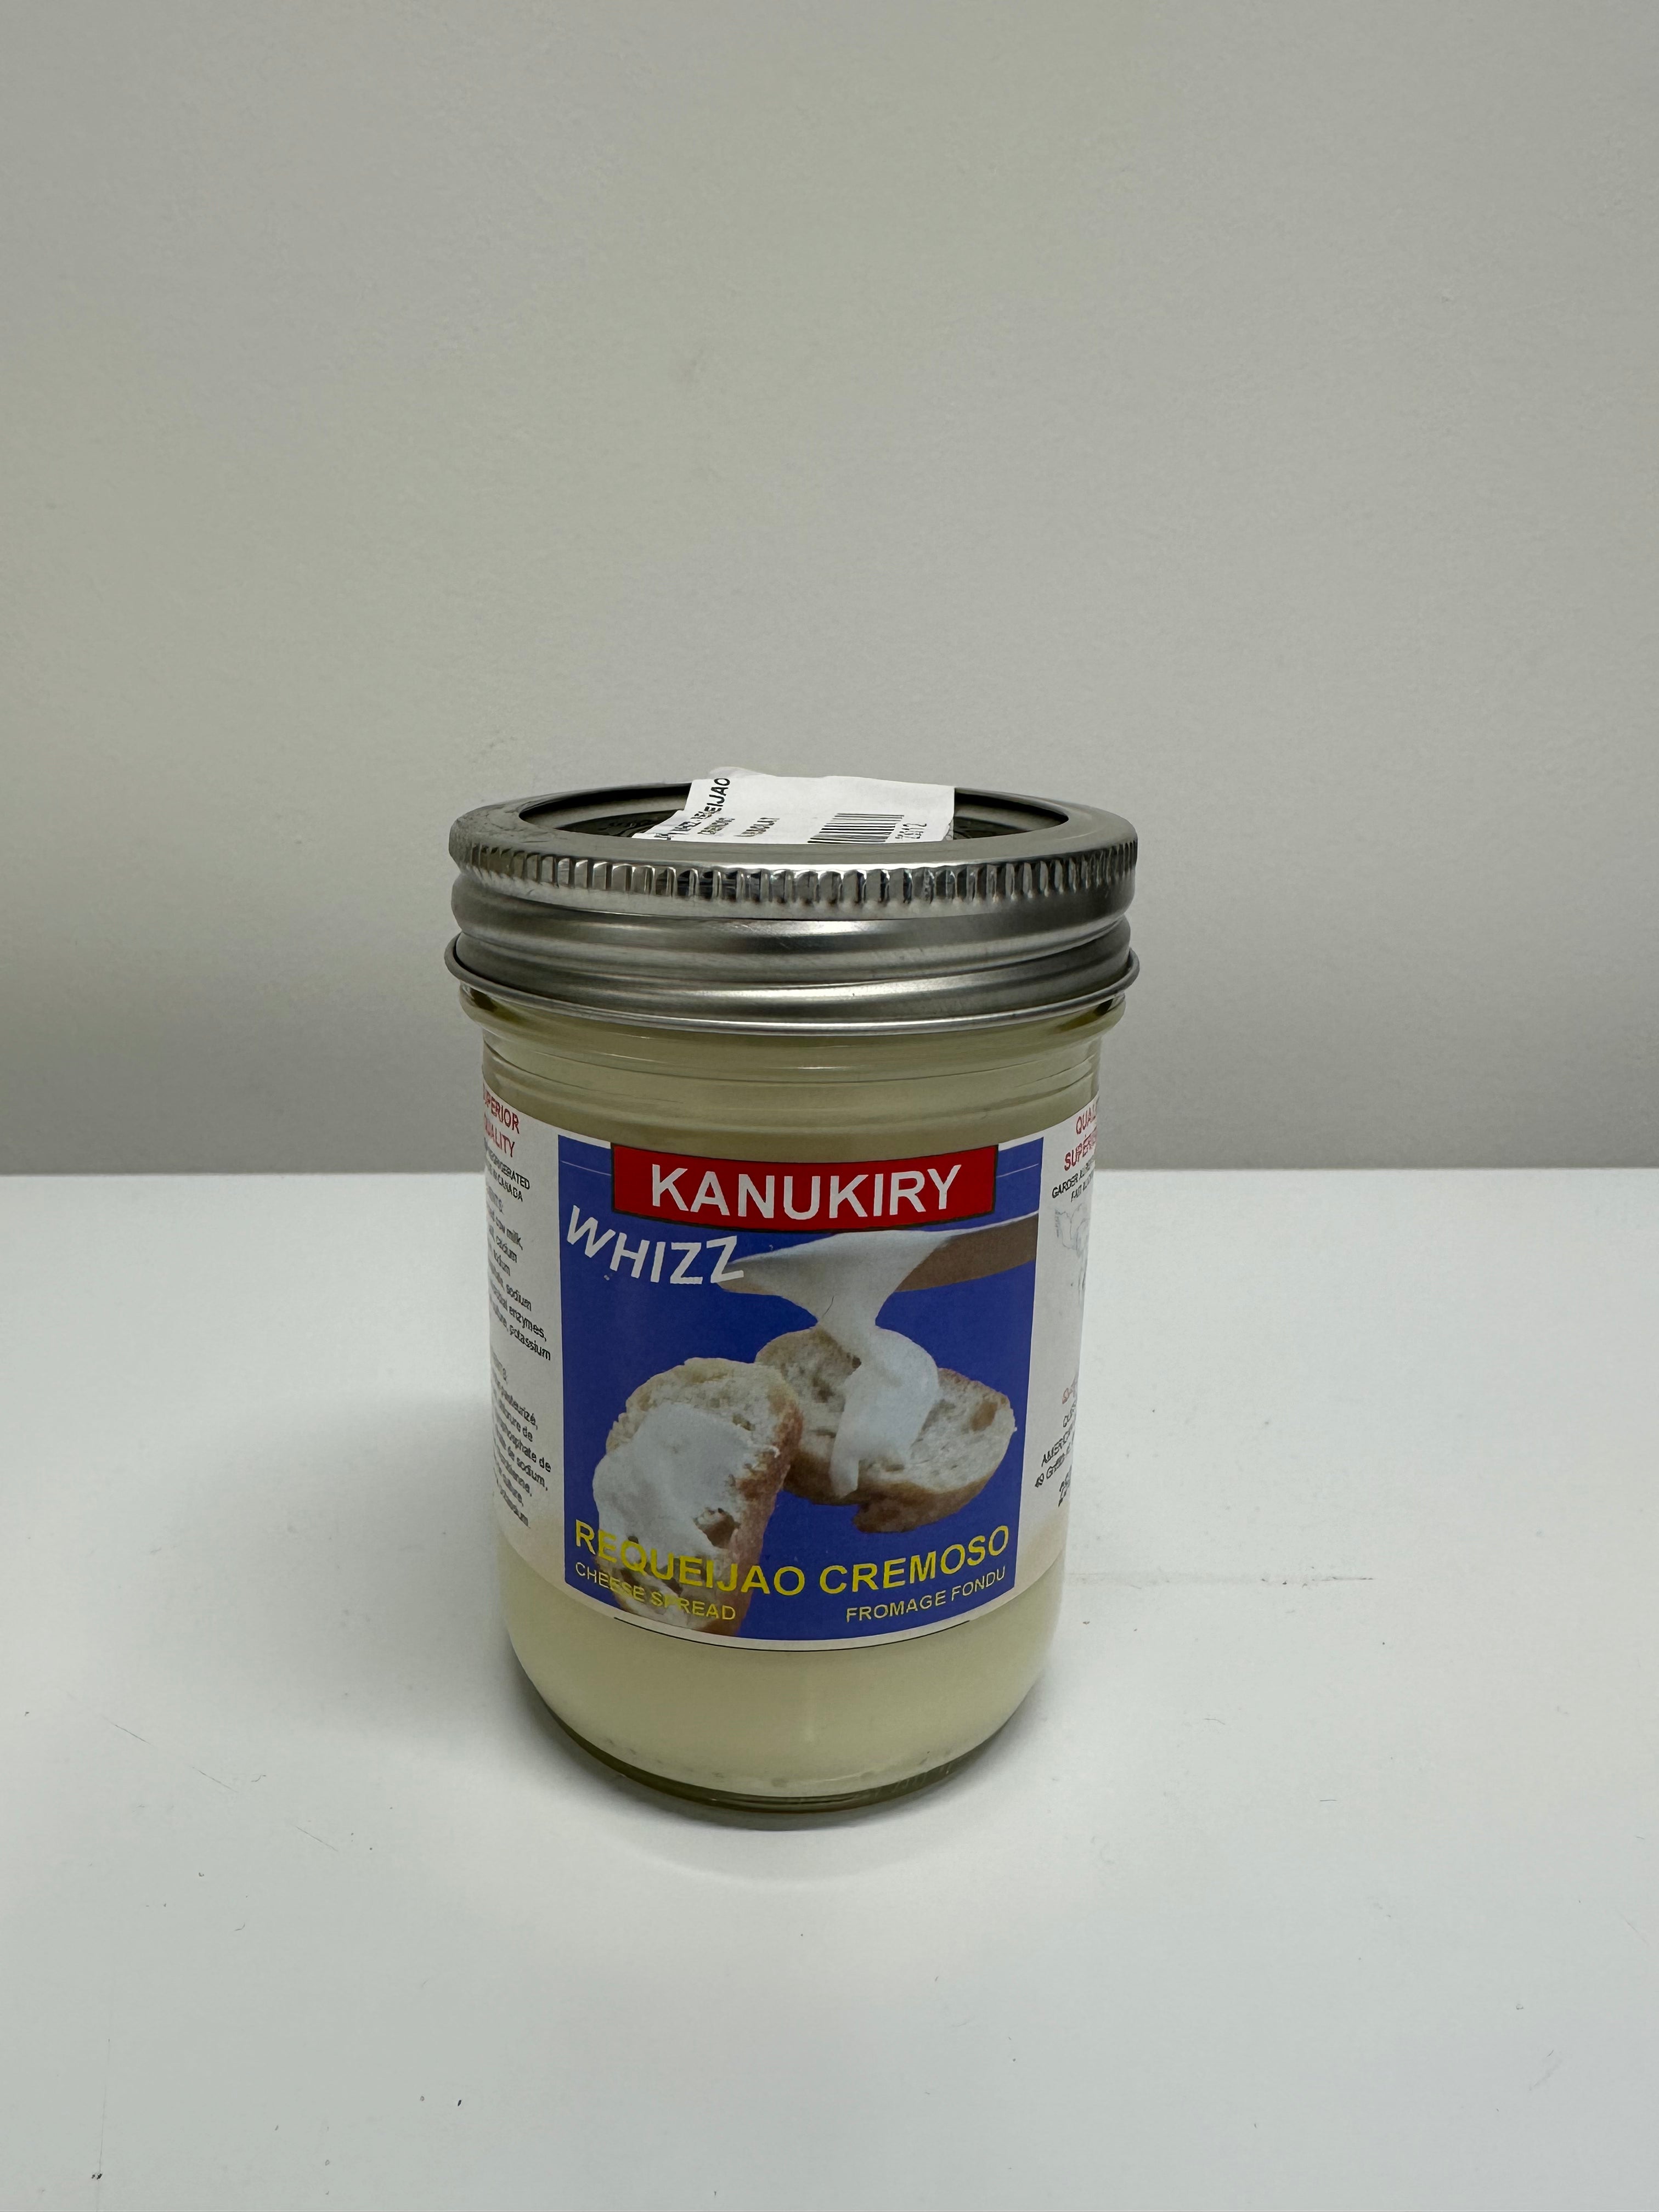 QUESOLAT - Kanukiry Whizz (Cheese Spread) 250g - FINAL SALE - EXPIRED or CLOSE TO EXPIRY